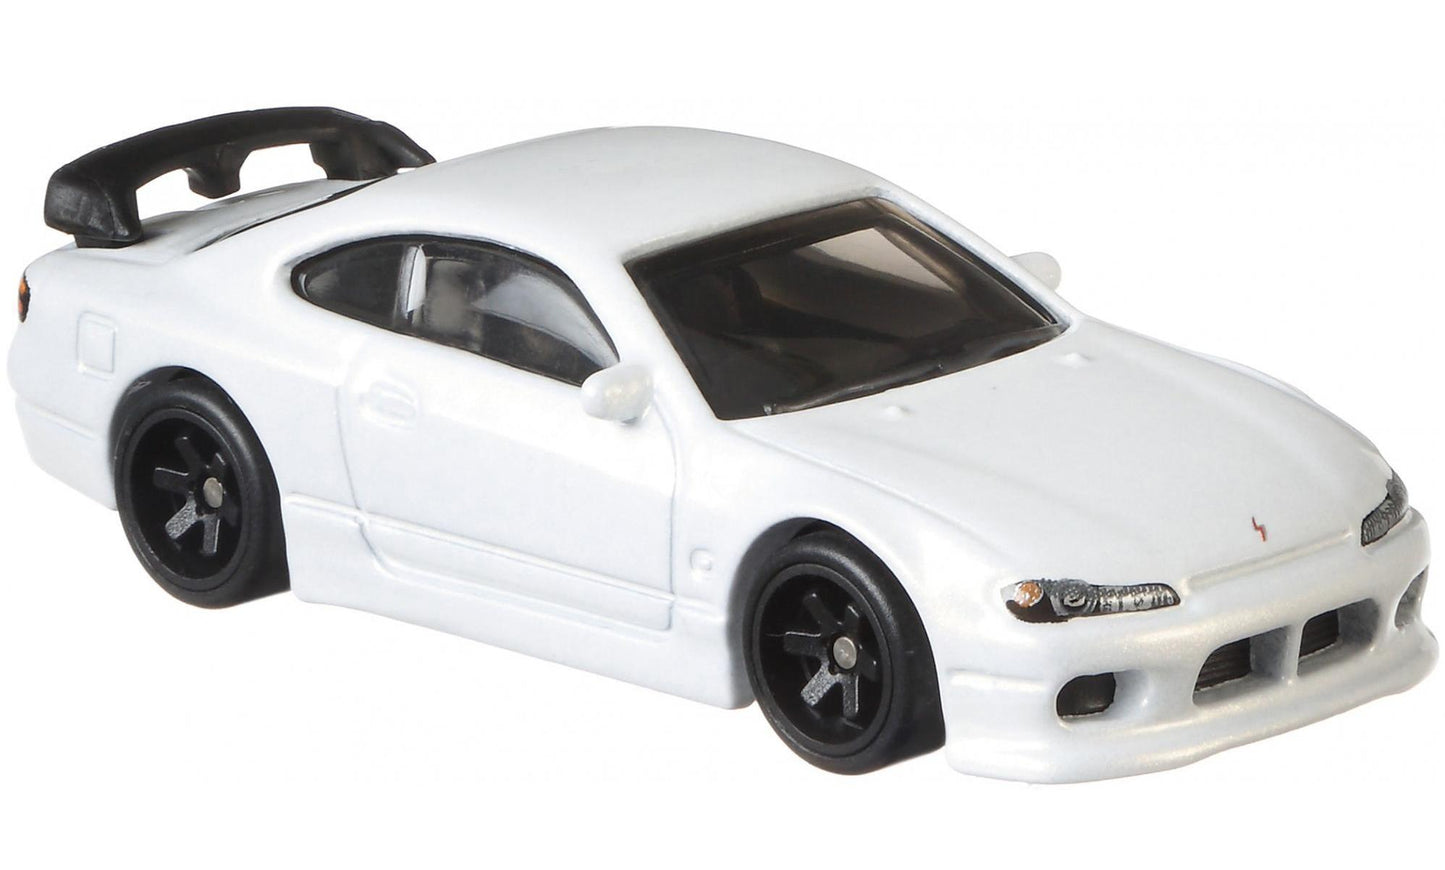 BAD CARD CRACKED BUBBLE Hot Wheels Street Tuners Nissan Silvia S15 White 1:64